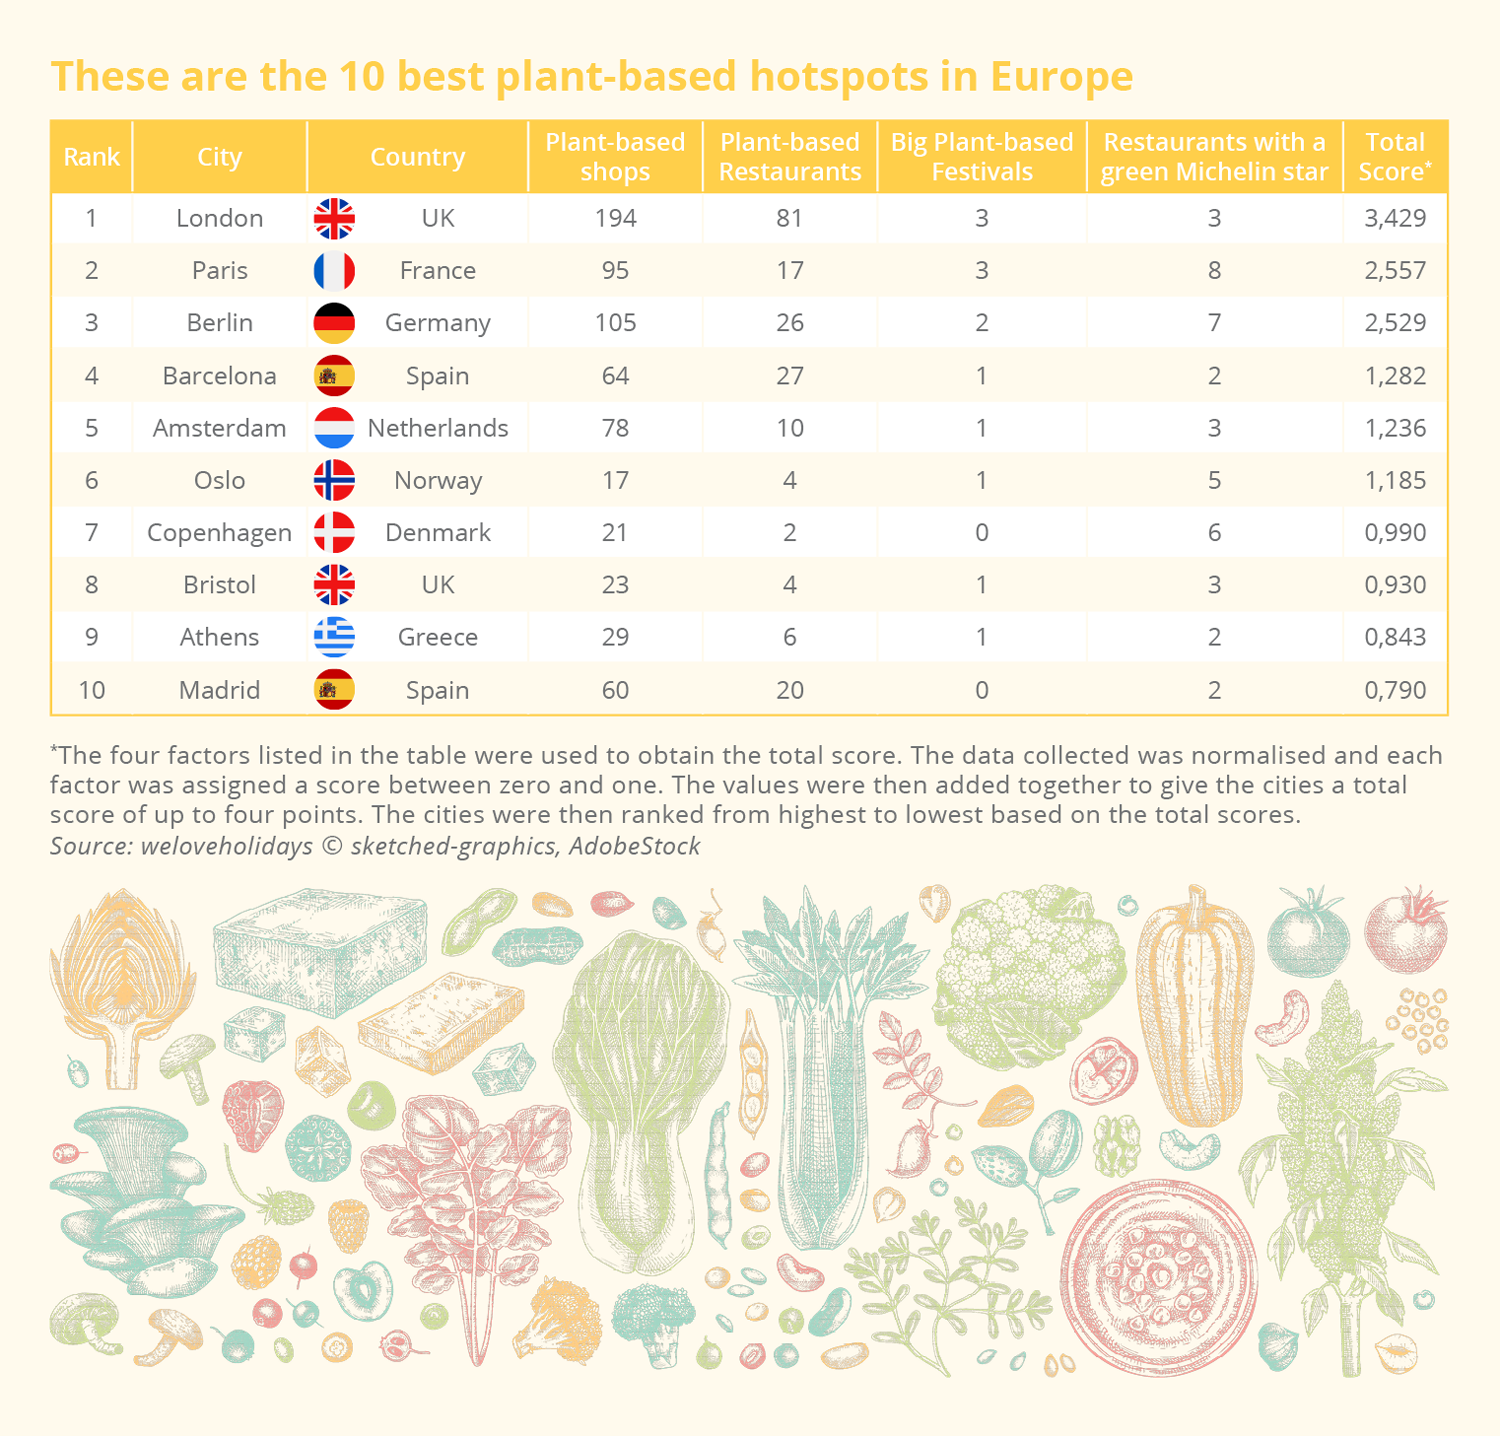 VERMISCHTES These are the 10 best plant-based hotspots in Europe